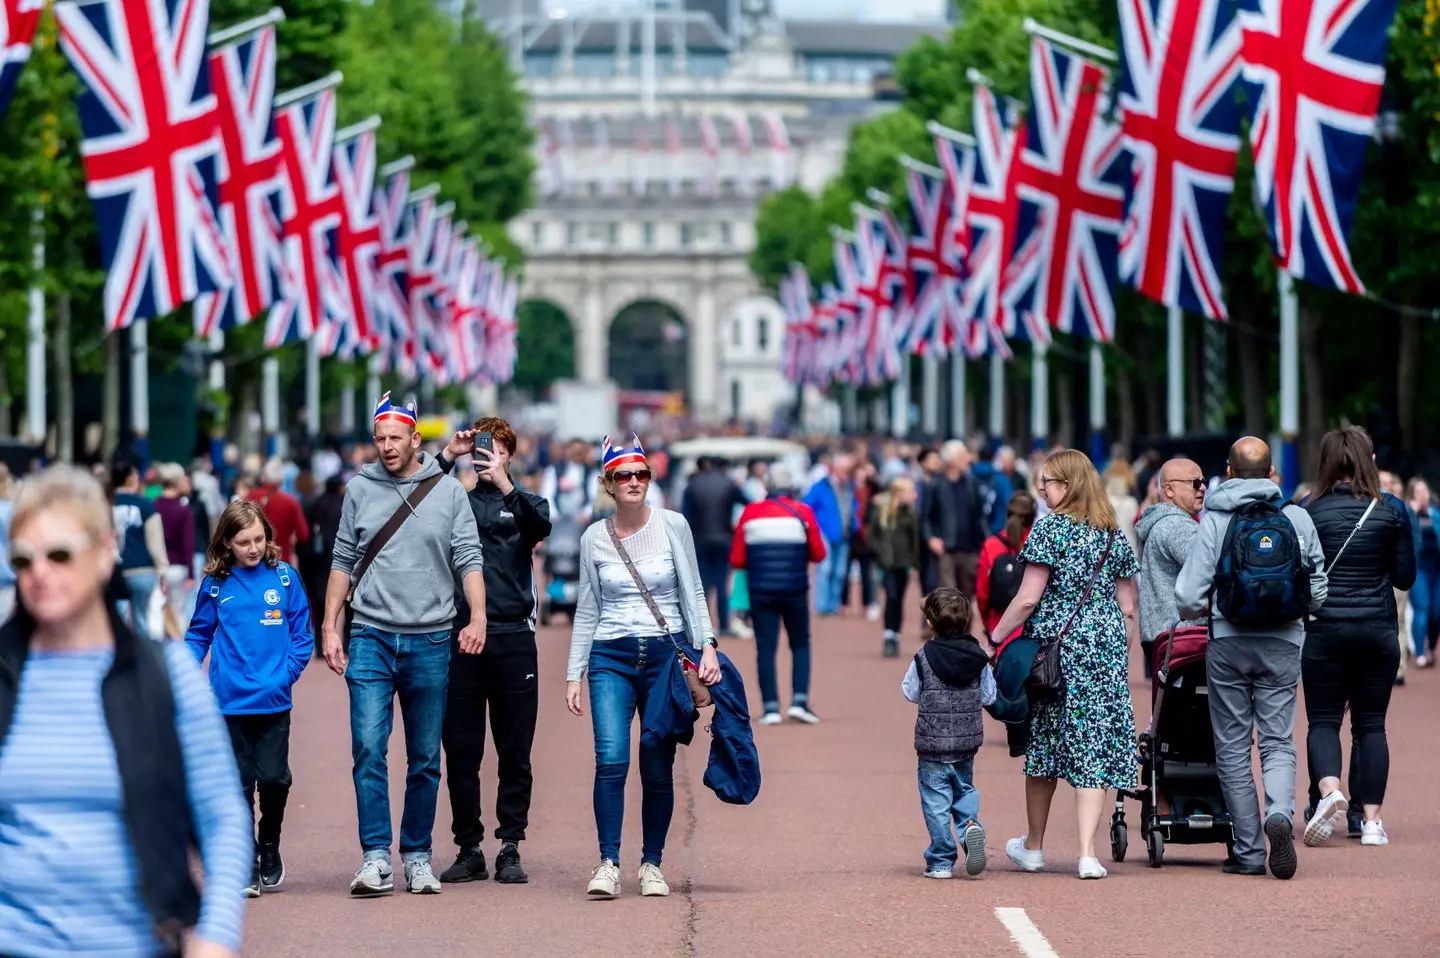 The Queen's Jubilee bank holiday is set to be an expensive one.